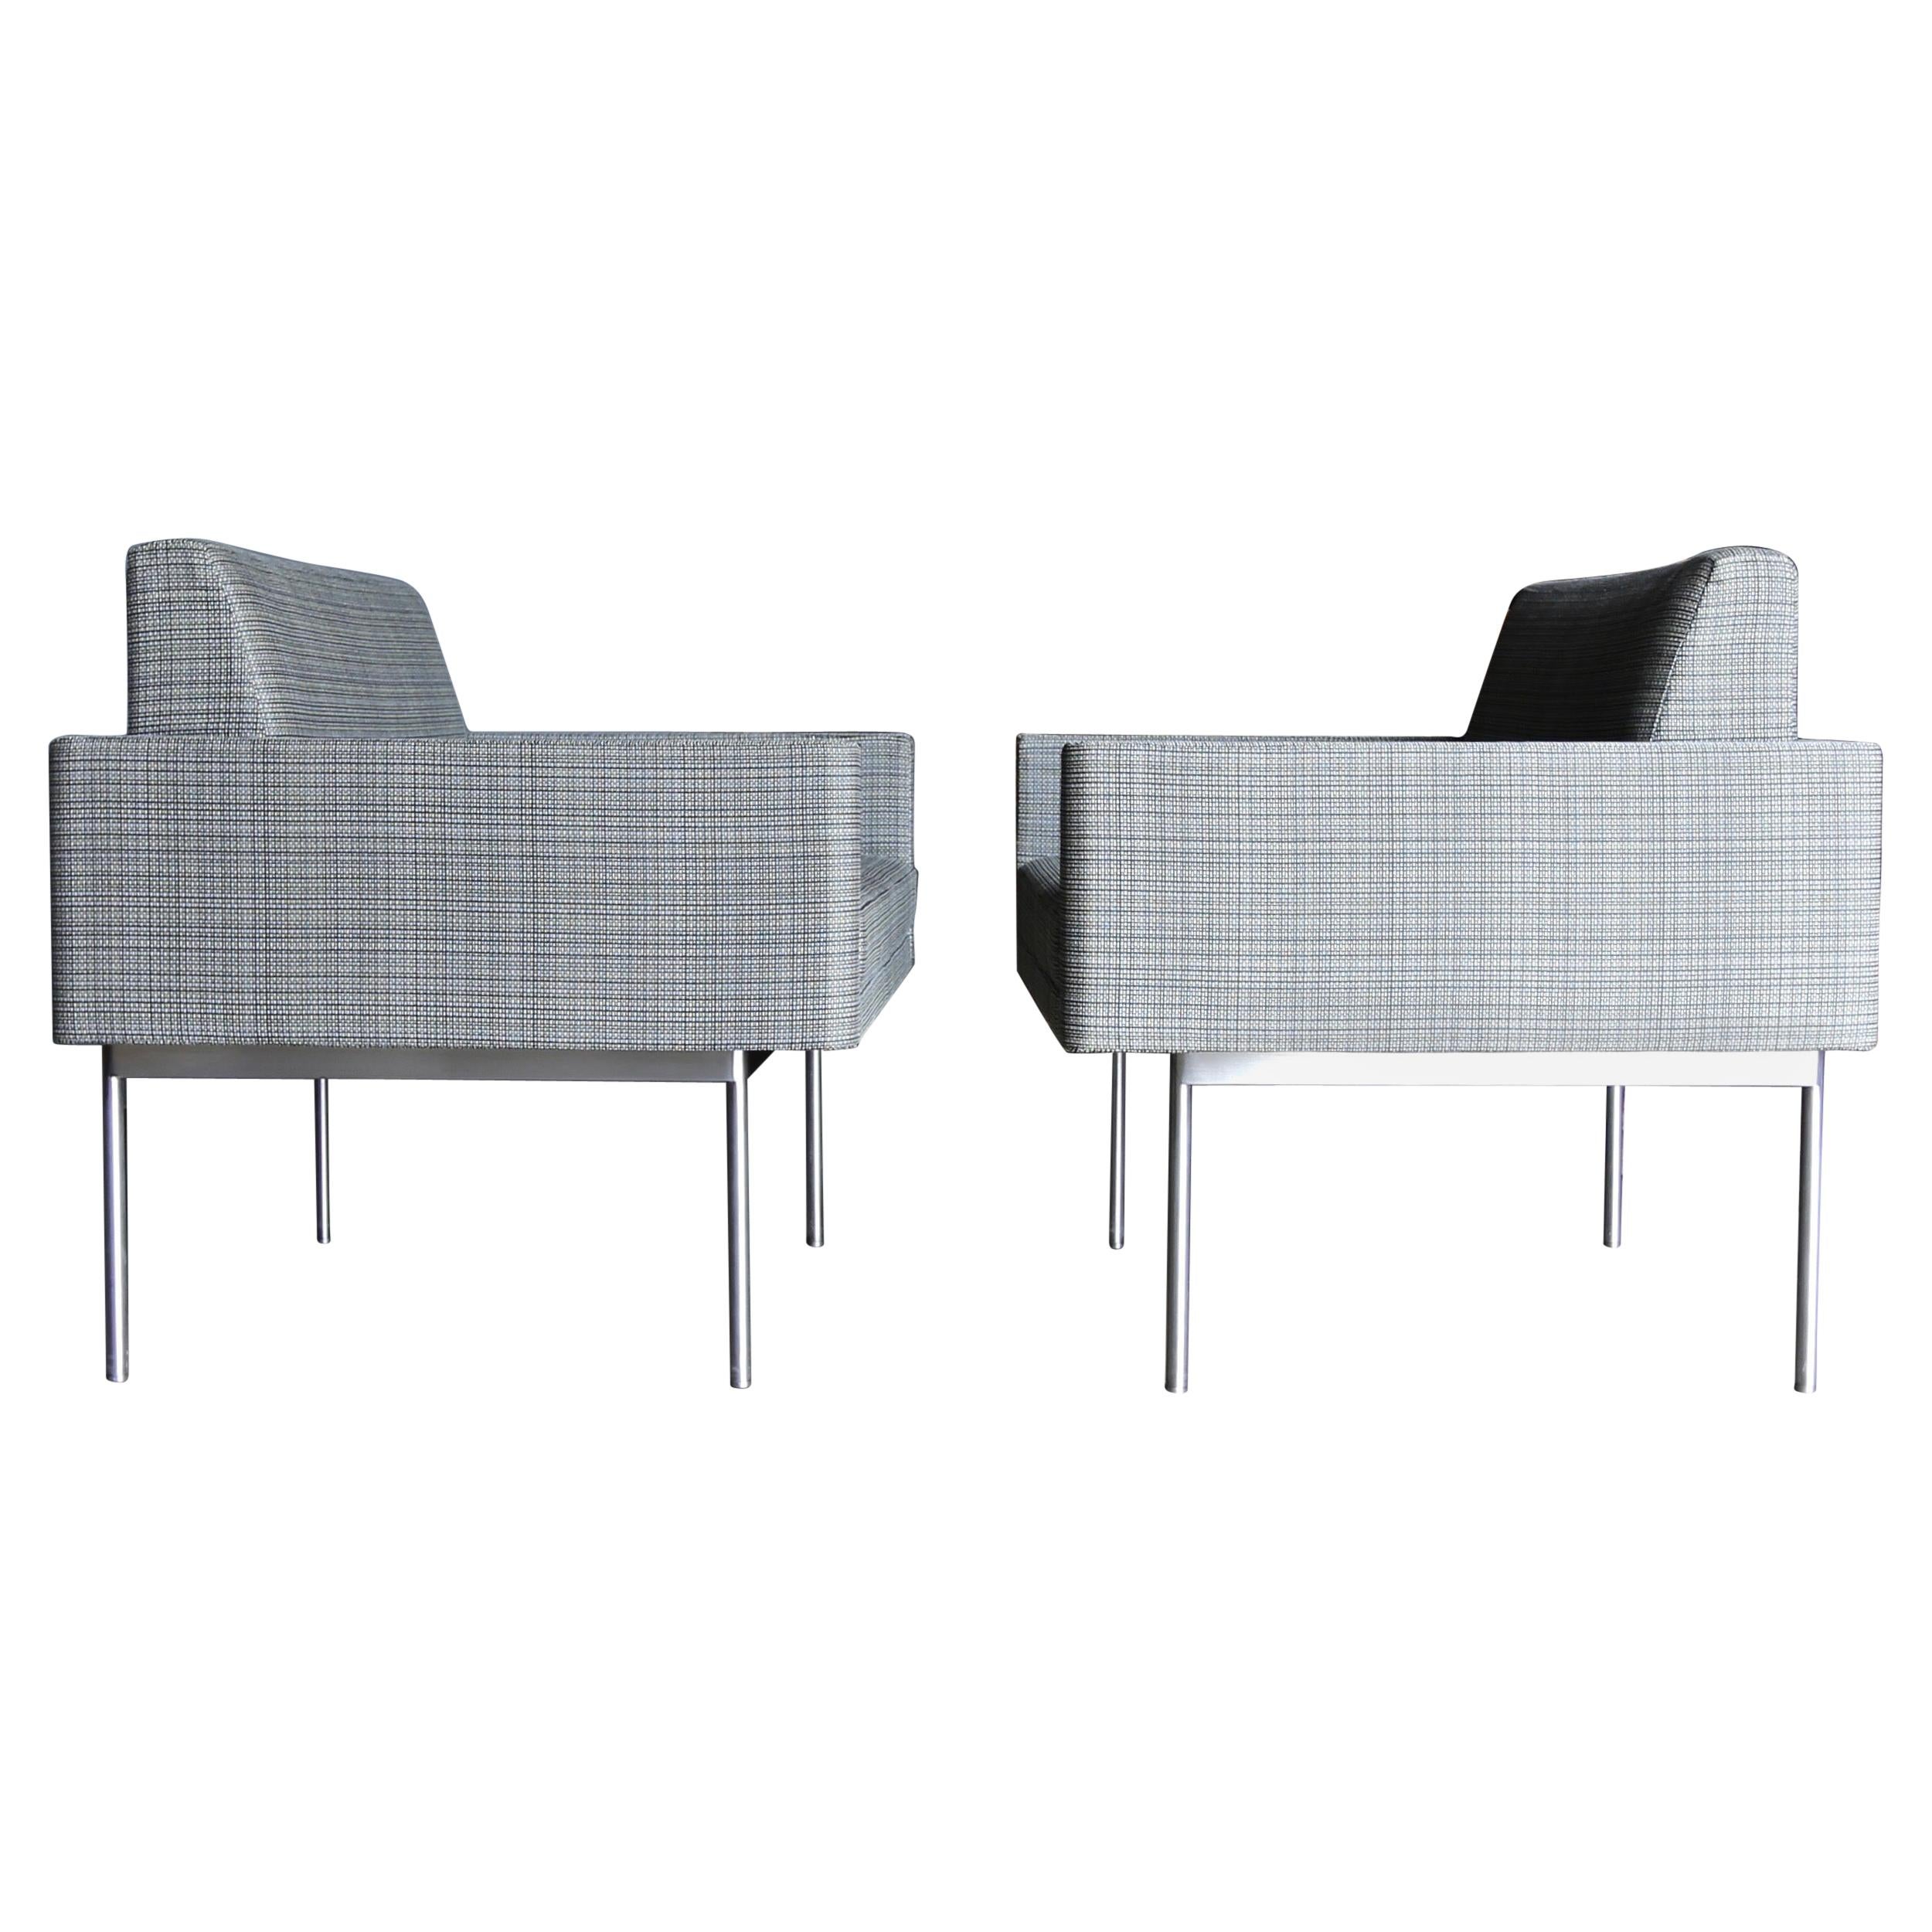 Bassam Fellows Tuxedo Component Lounge Chairs for Geiger, 2015